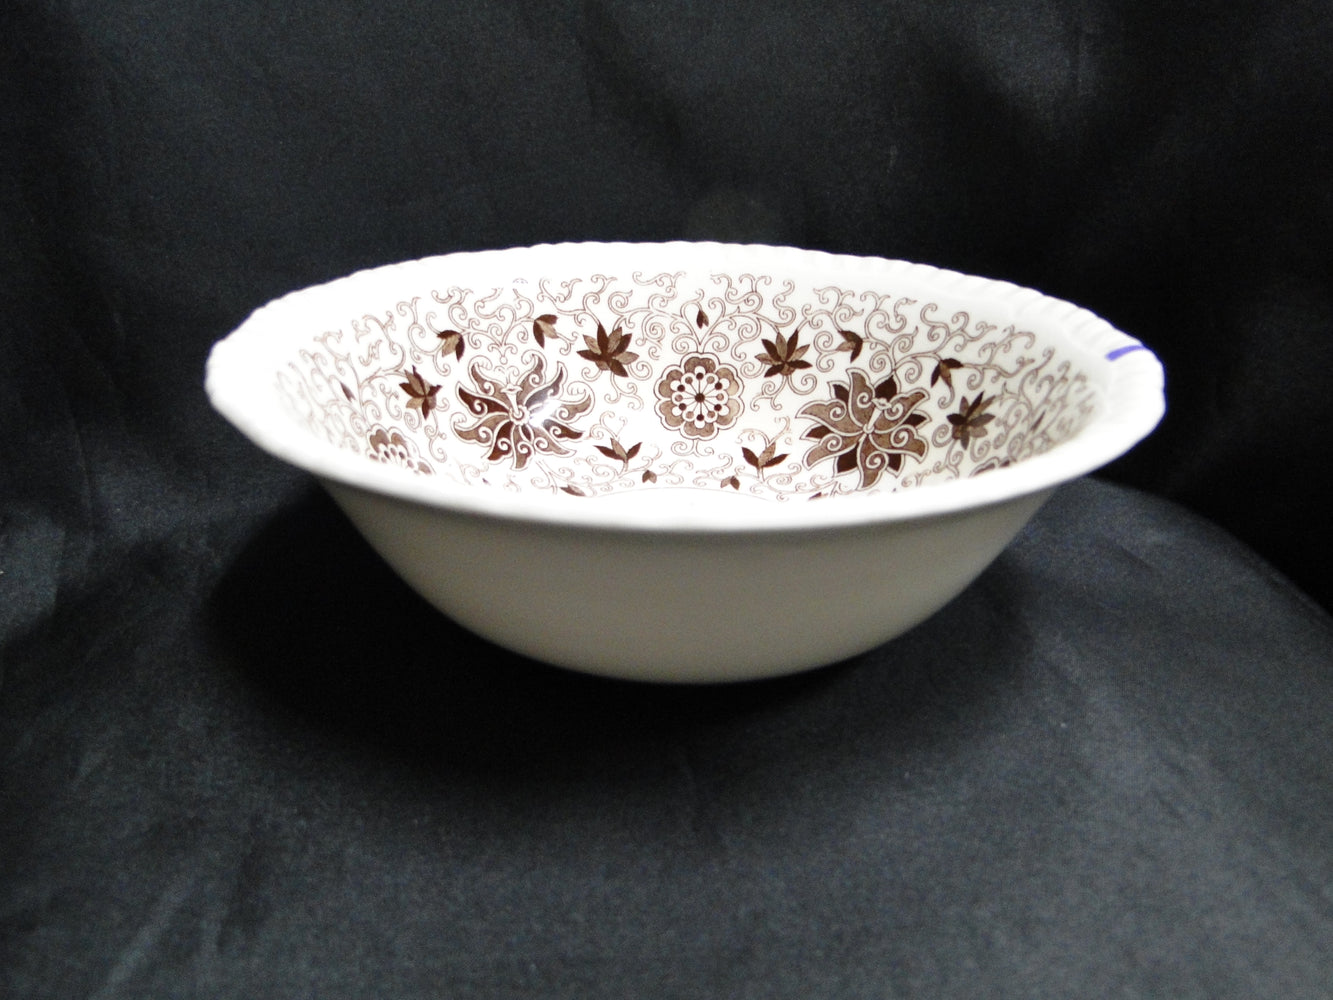 Mason's Bow Bells Brown, Flowers & Scrolls: Round Serving Bowl, 8 1/4", As Is